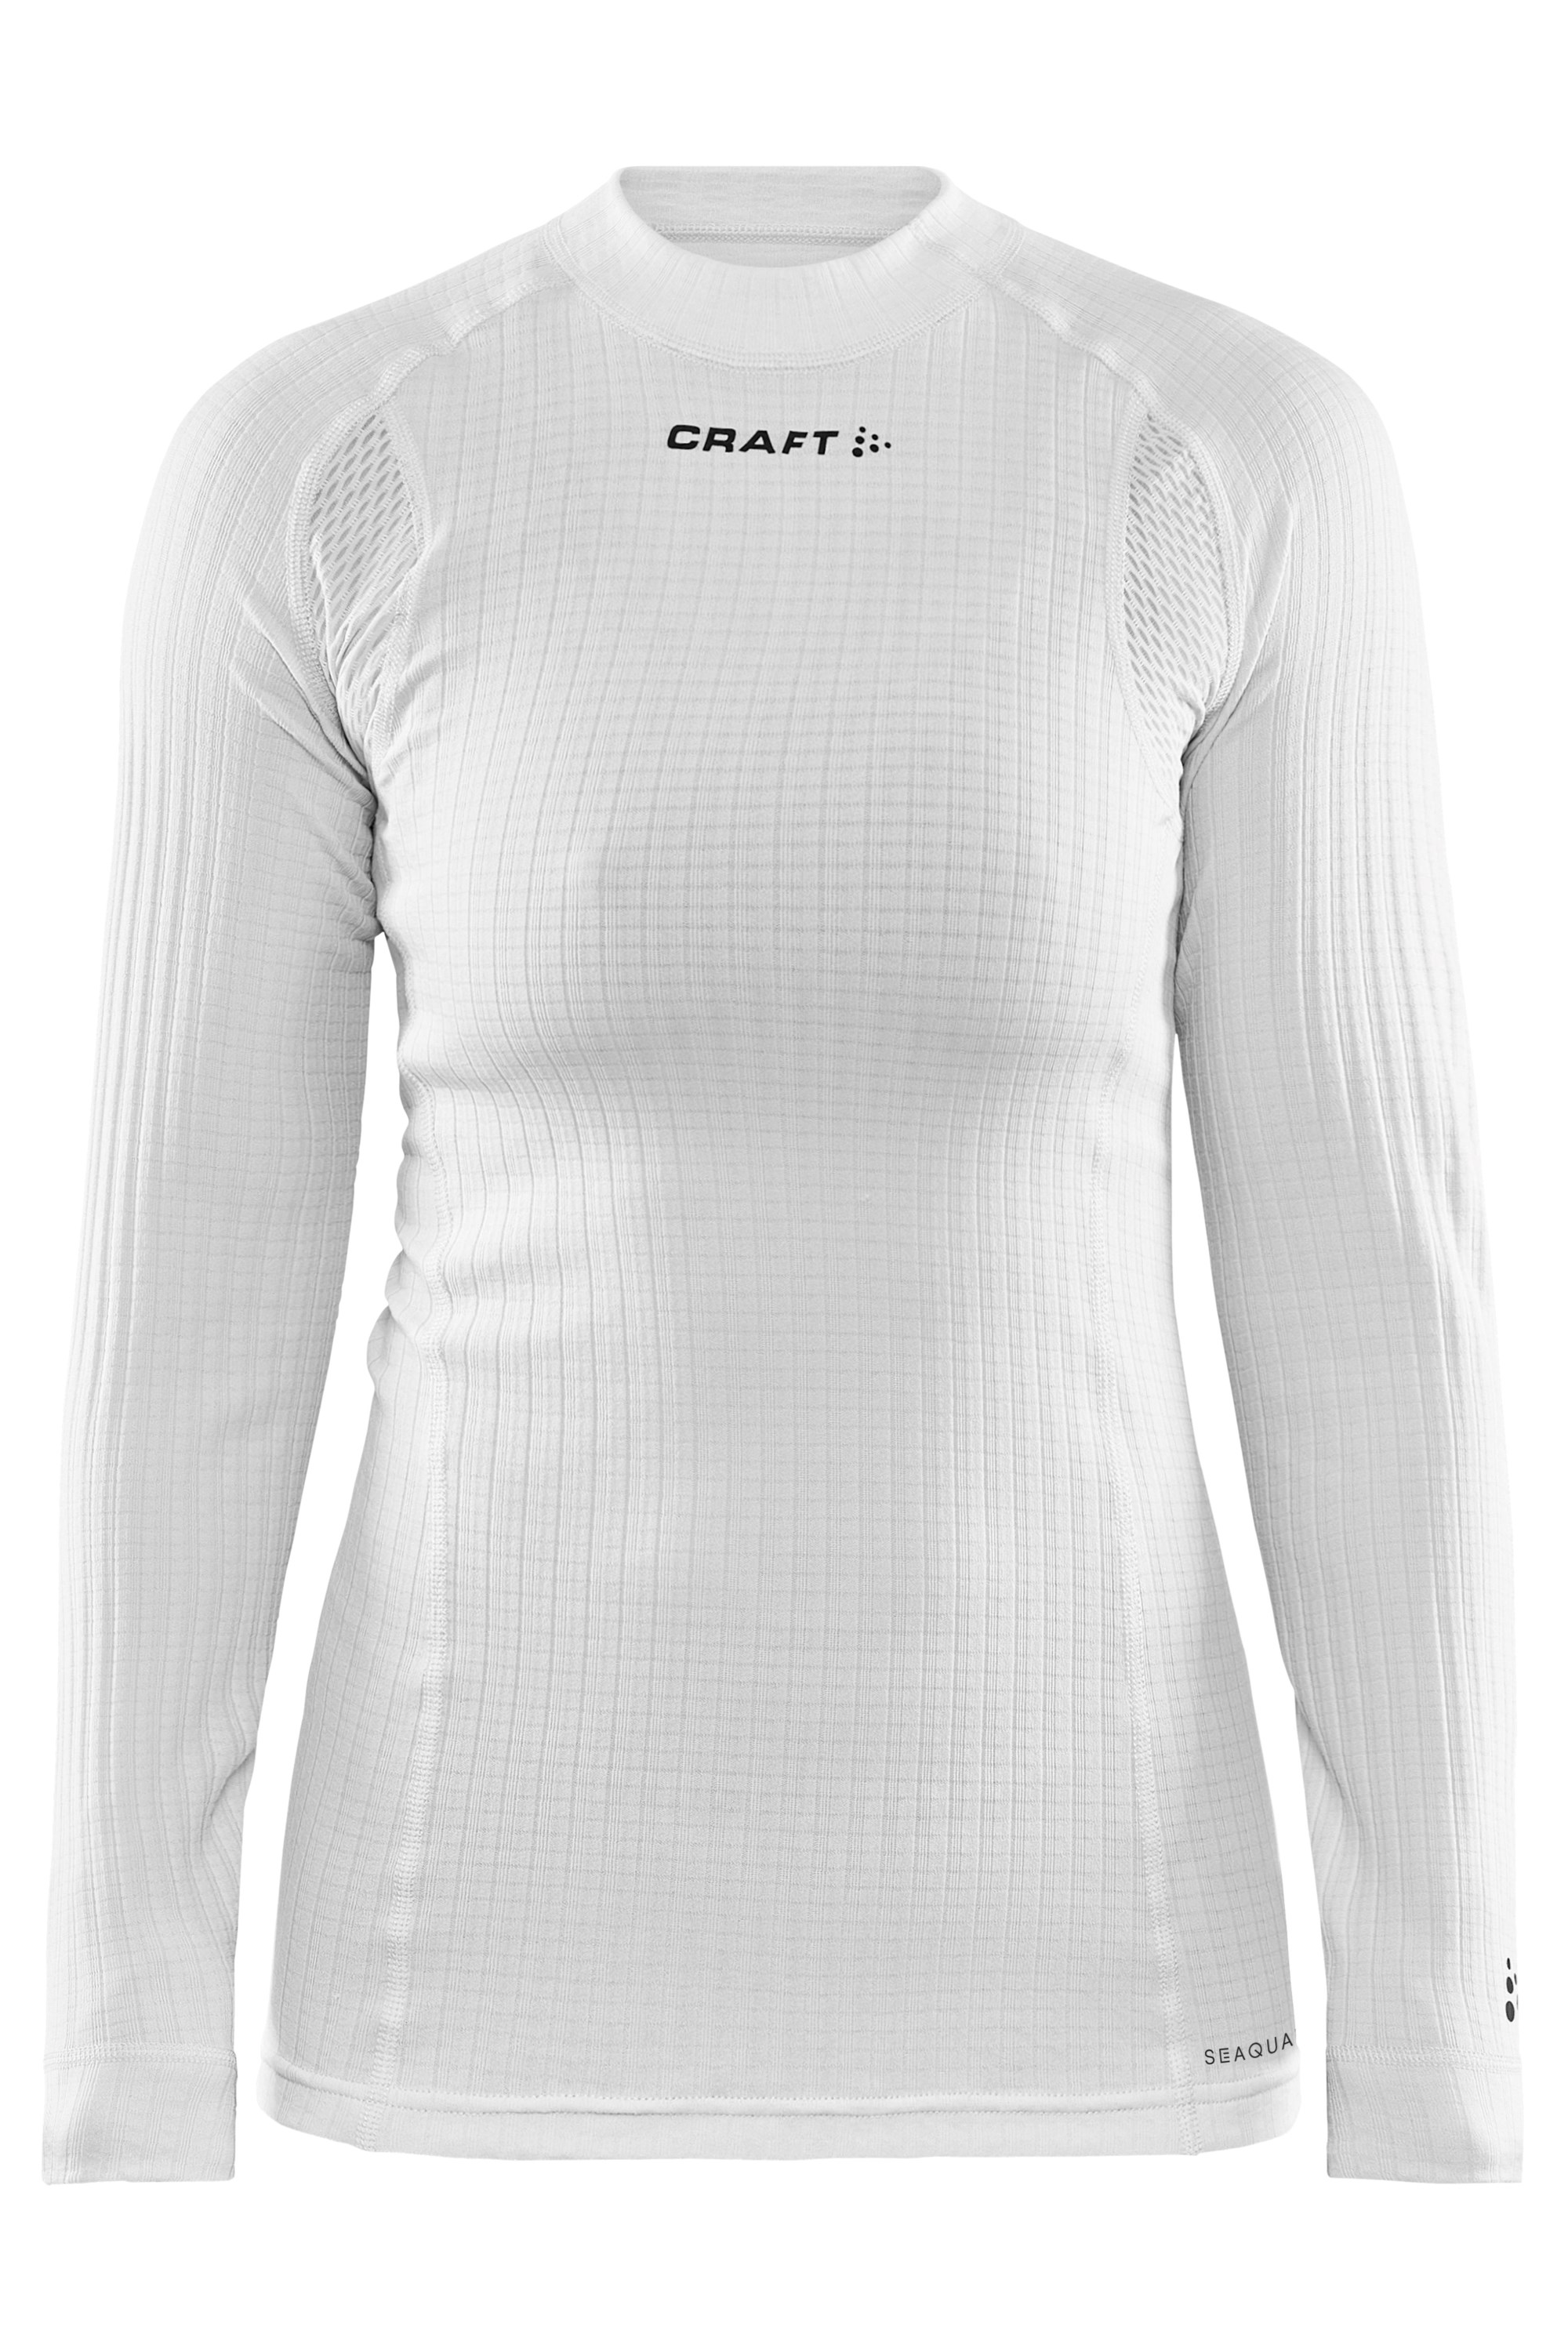 Active Extreme X Womens Long Sleeve Baselayer Top -